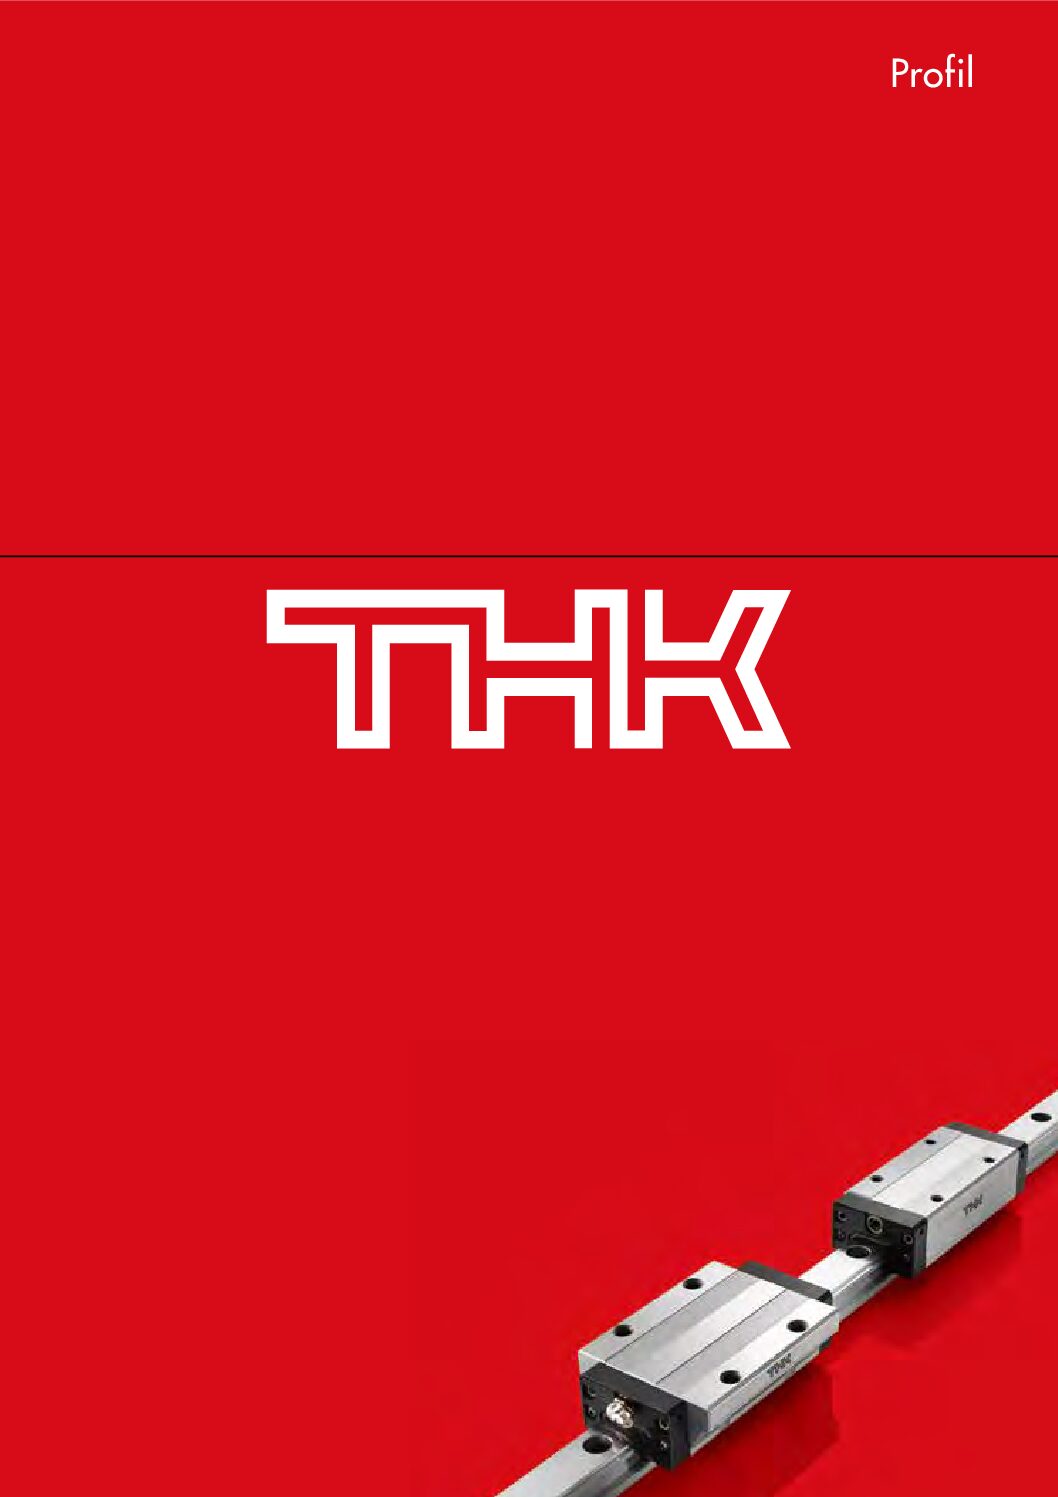 THK | Innovative Products That Enrich Society